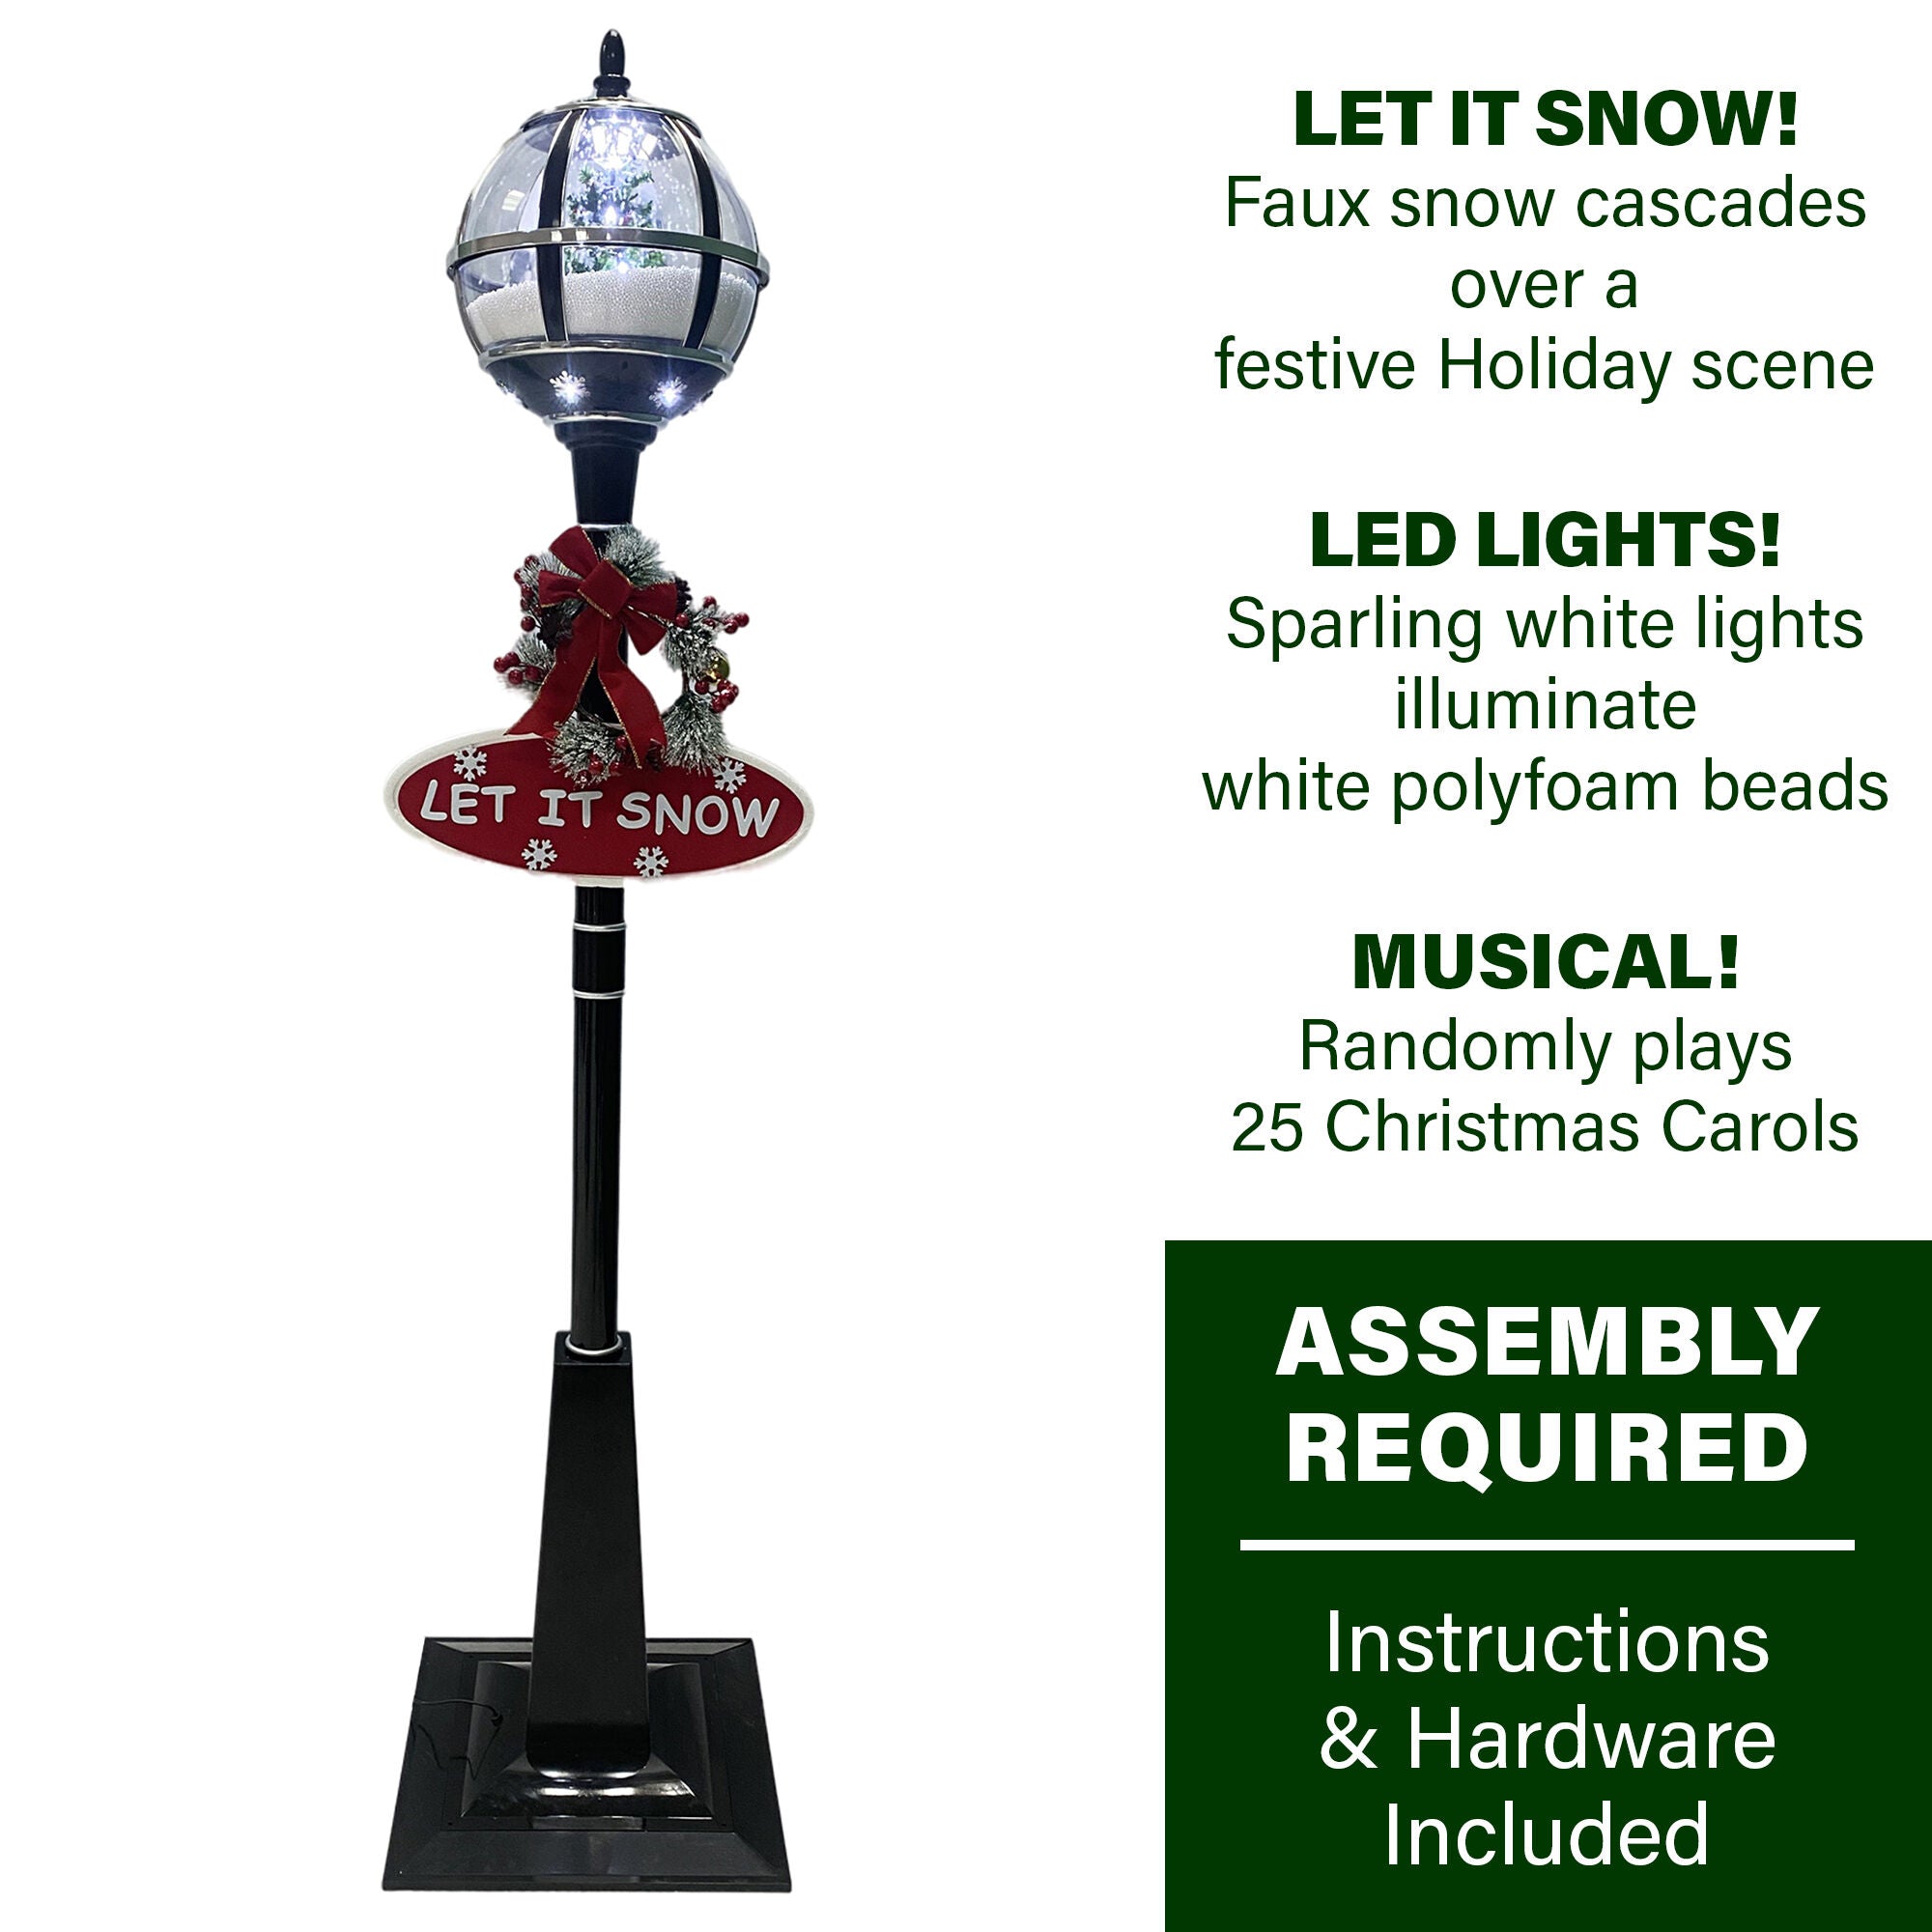 Fraser Hill Farm -  Let It Snow Series 69-In. Musical Snow Globe Lamp Post with Tree Scene, 2 Signs, Cascading Snow, and Christmas Carols, Black